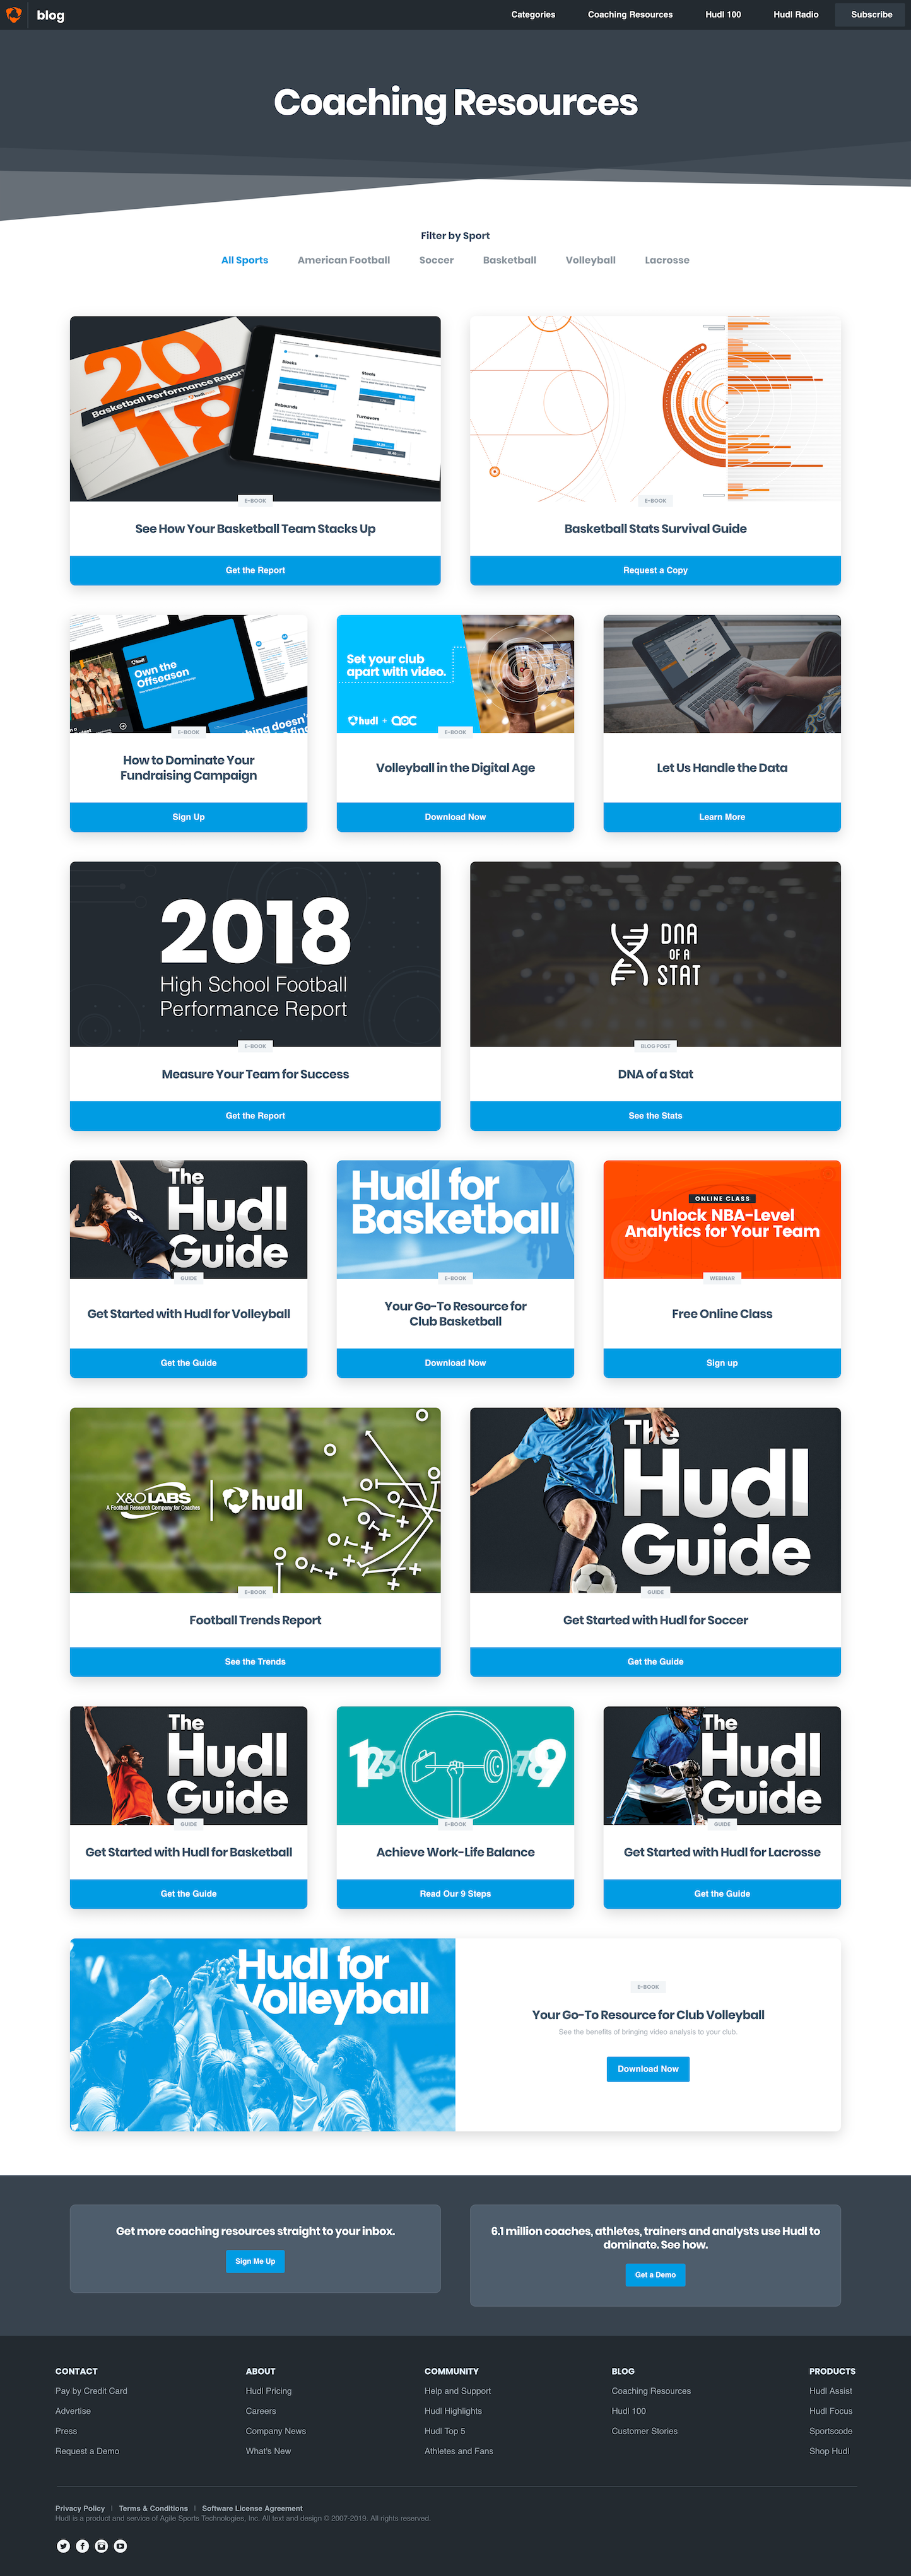 Screenshot of the Resources page from the Hudl website.